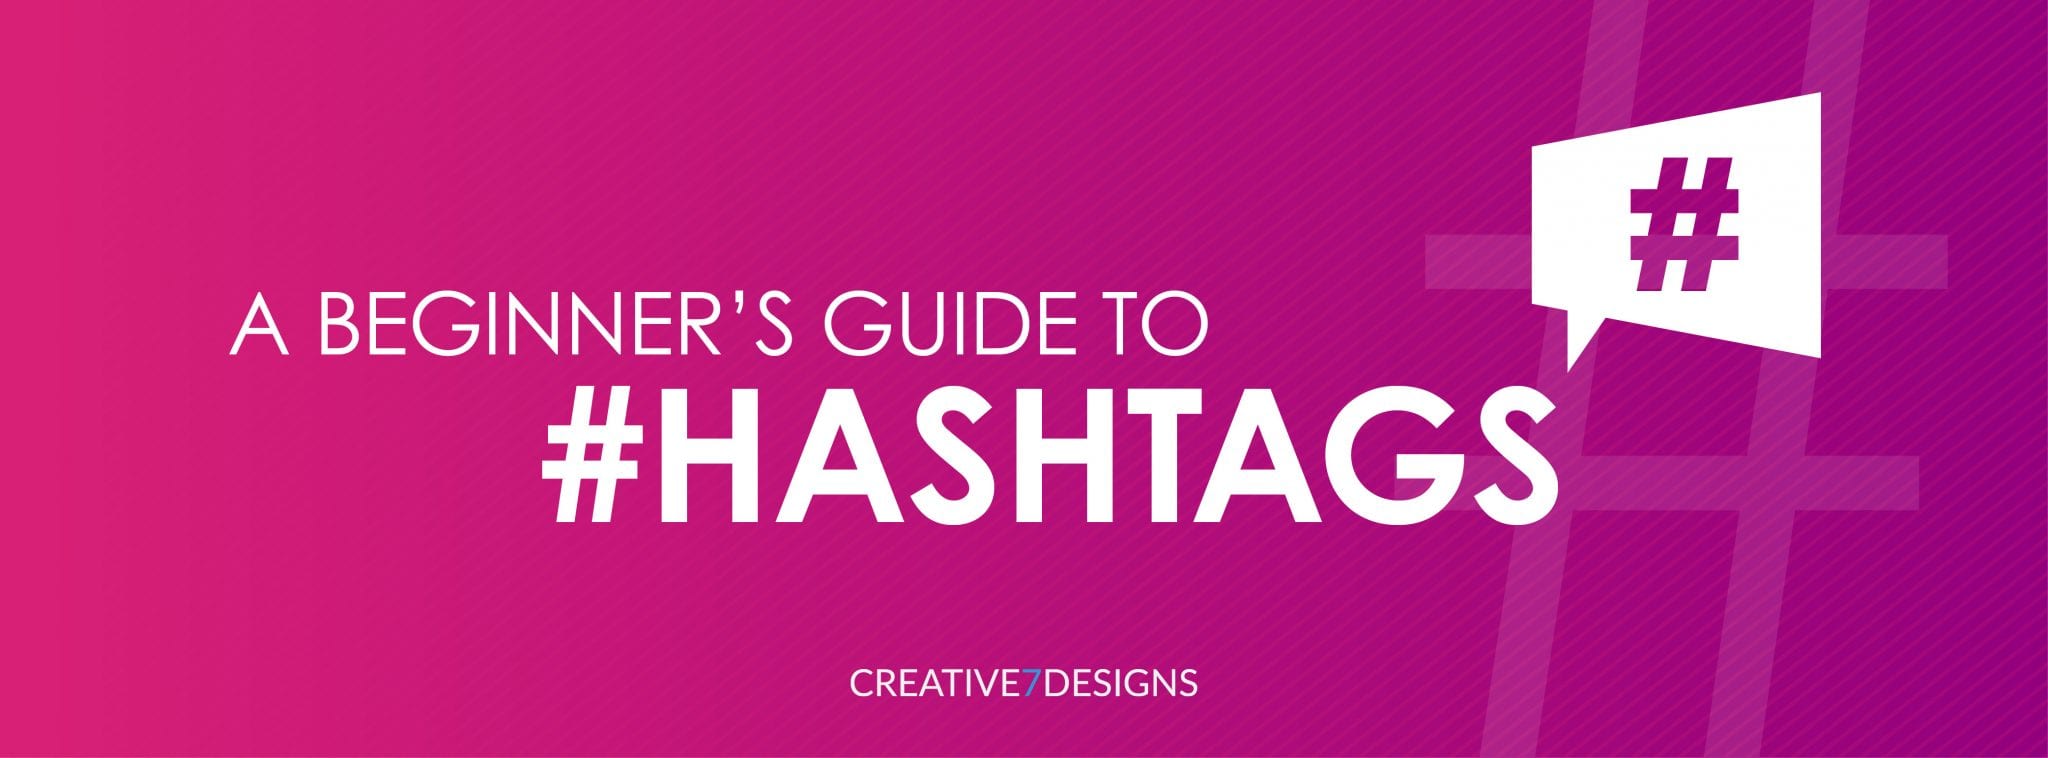 a beginner's guide to hashtags